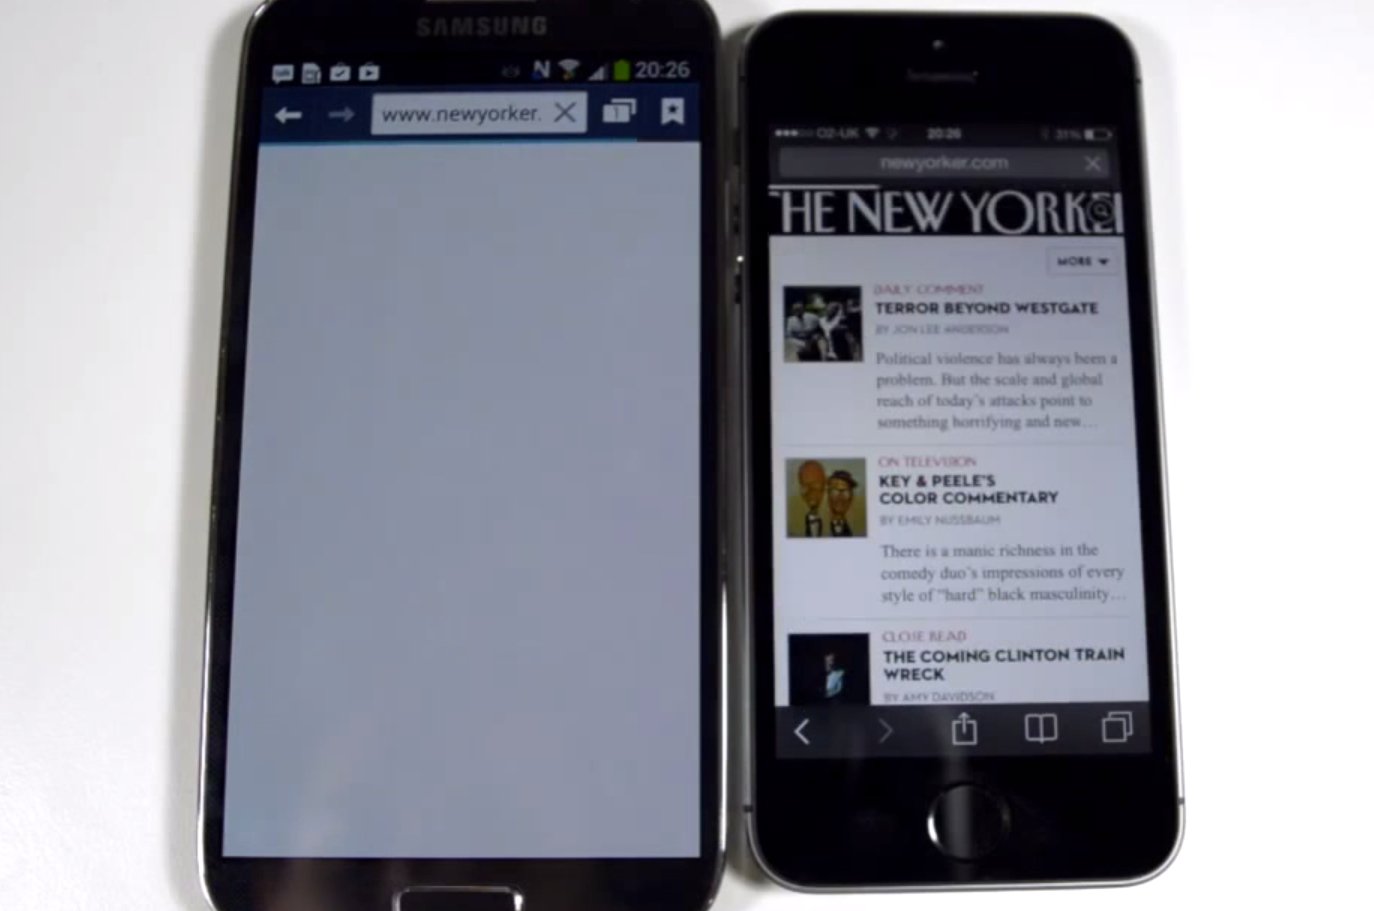 Browser Speed-Test iPhone 5s vs. Samsung Galaxy S4 5